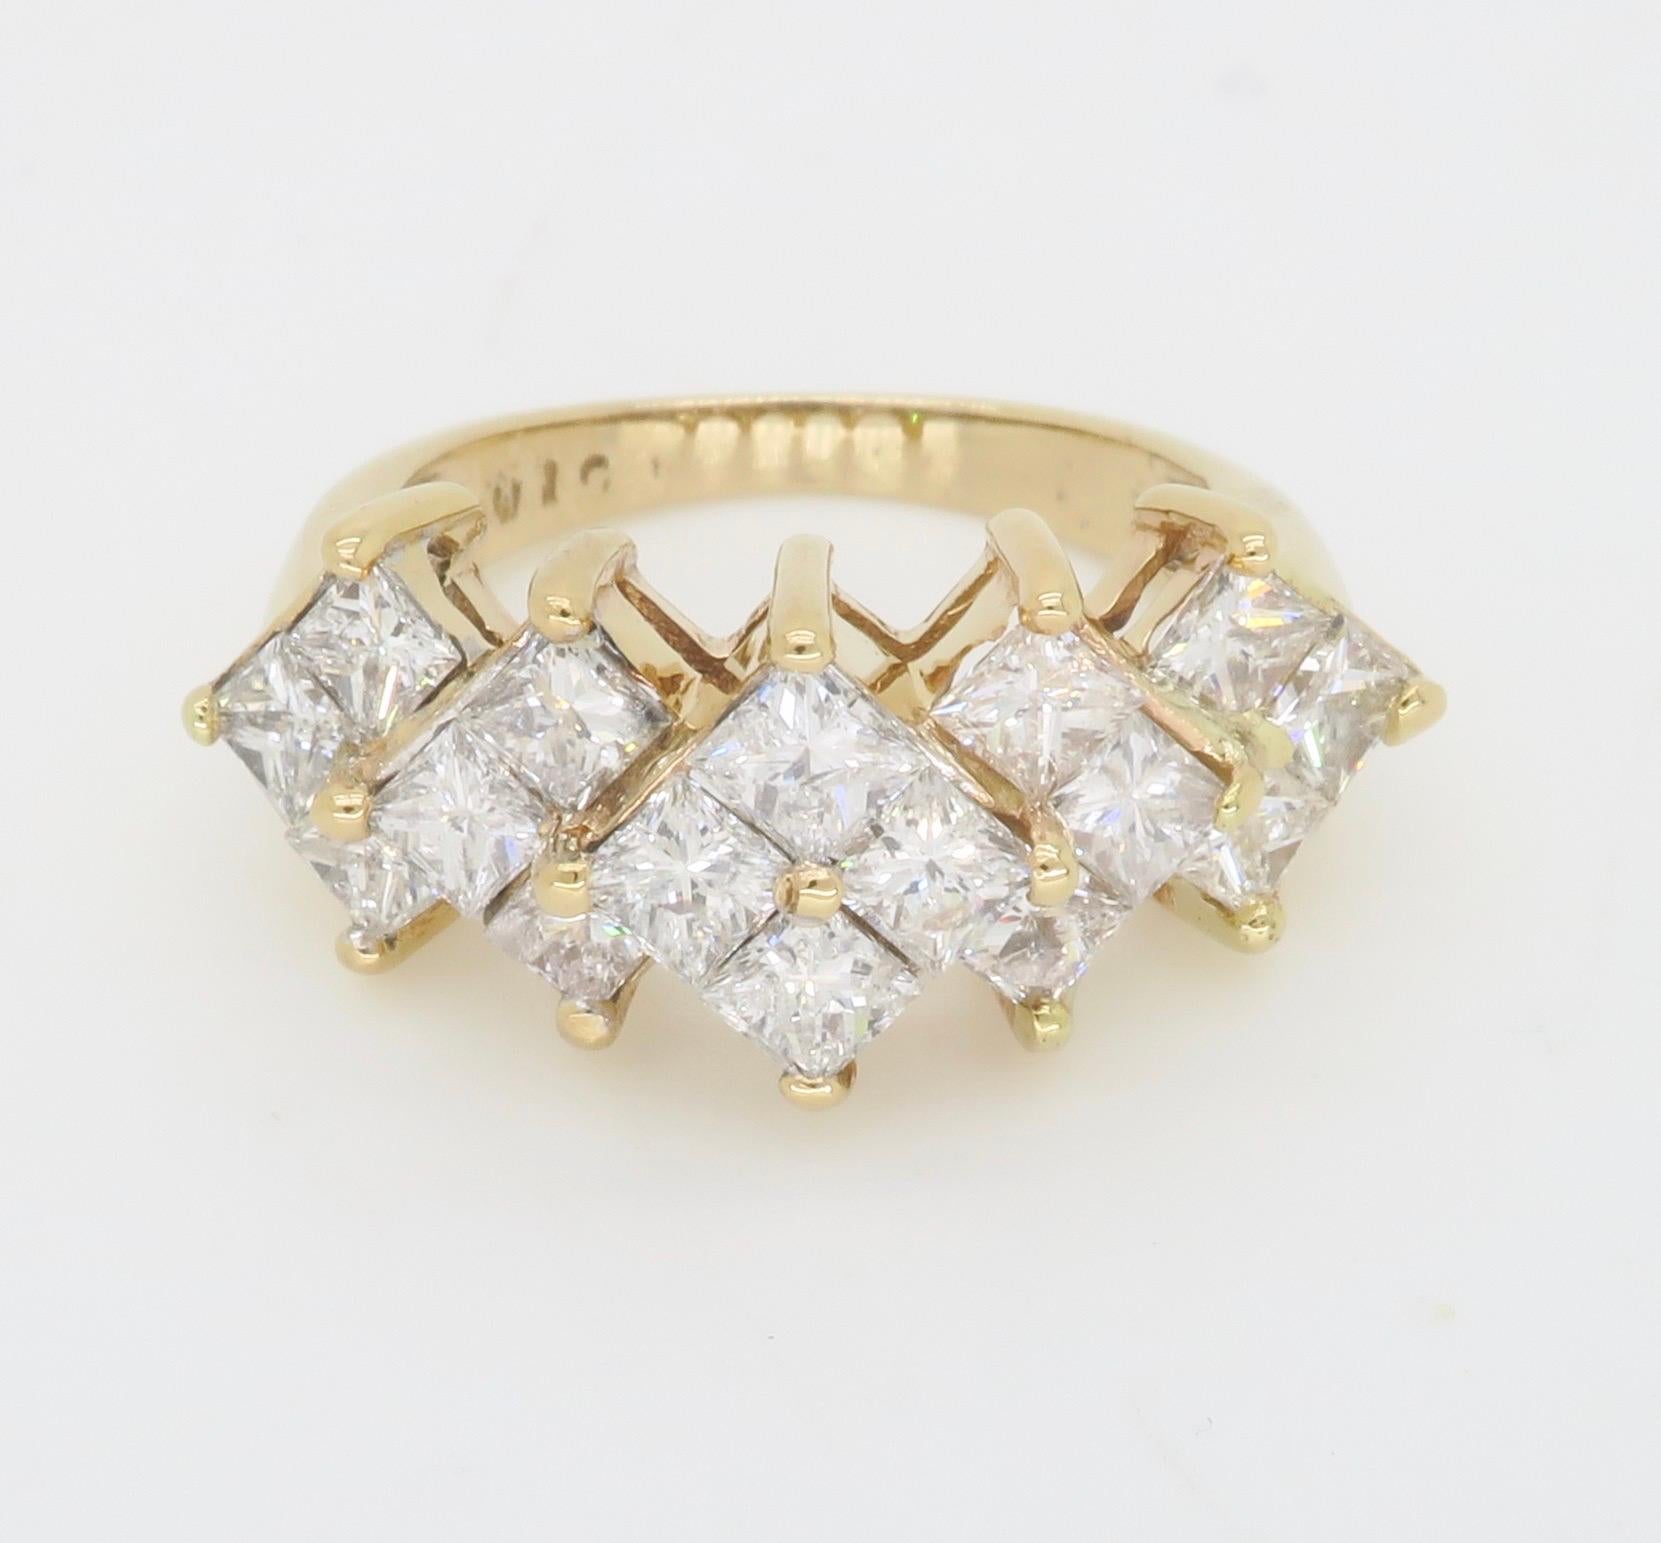 Kite Set Princess Cut Three Row Diamond Ring In Excellent Condition For Sale In Webster, NY